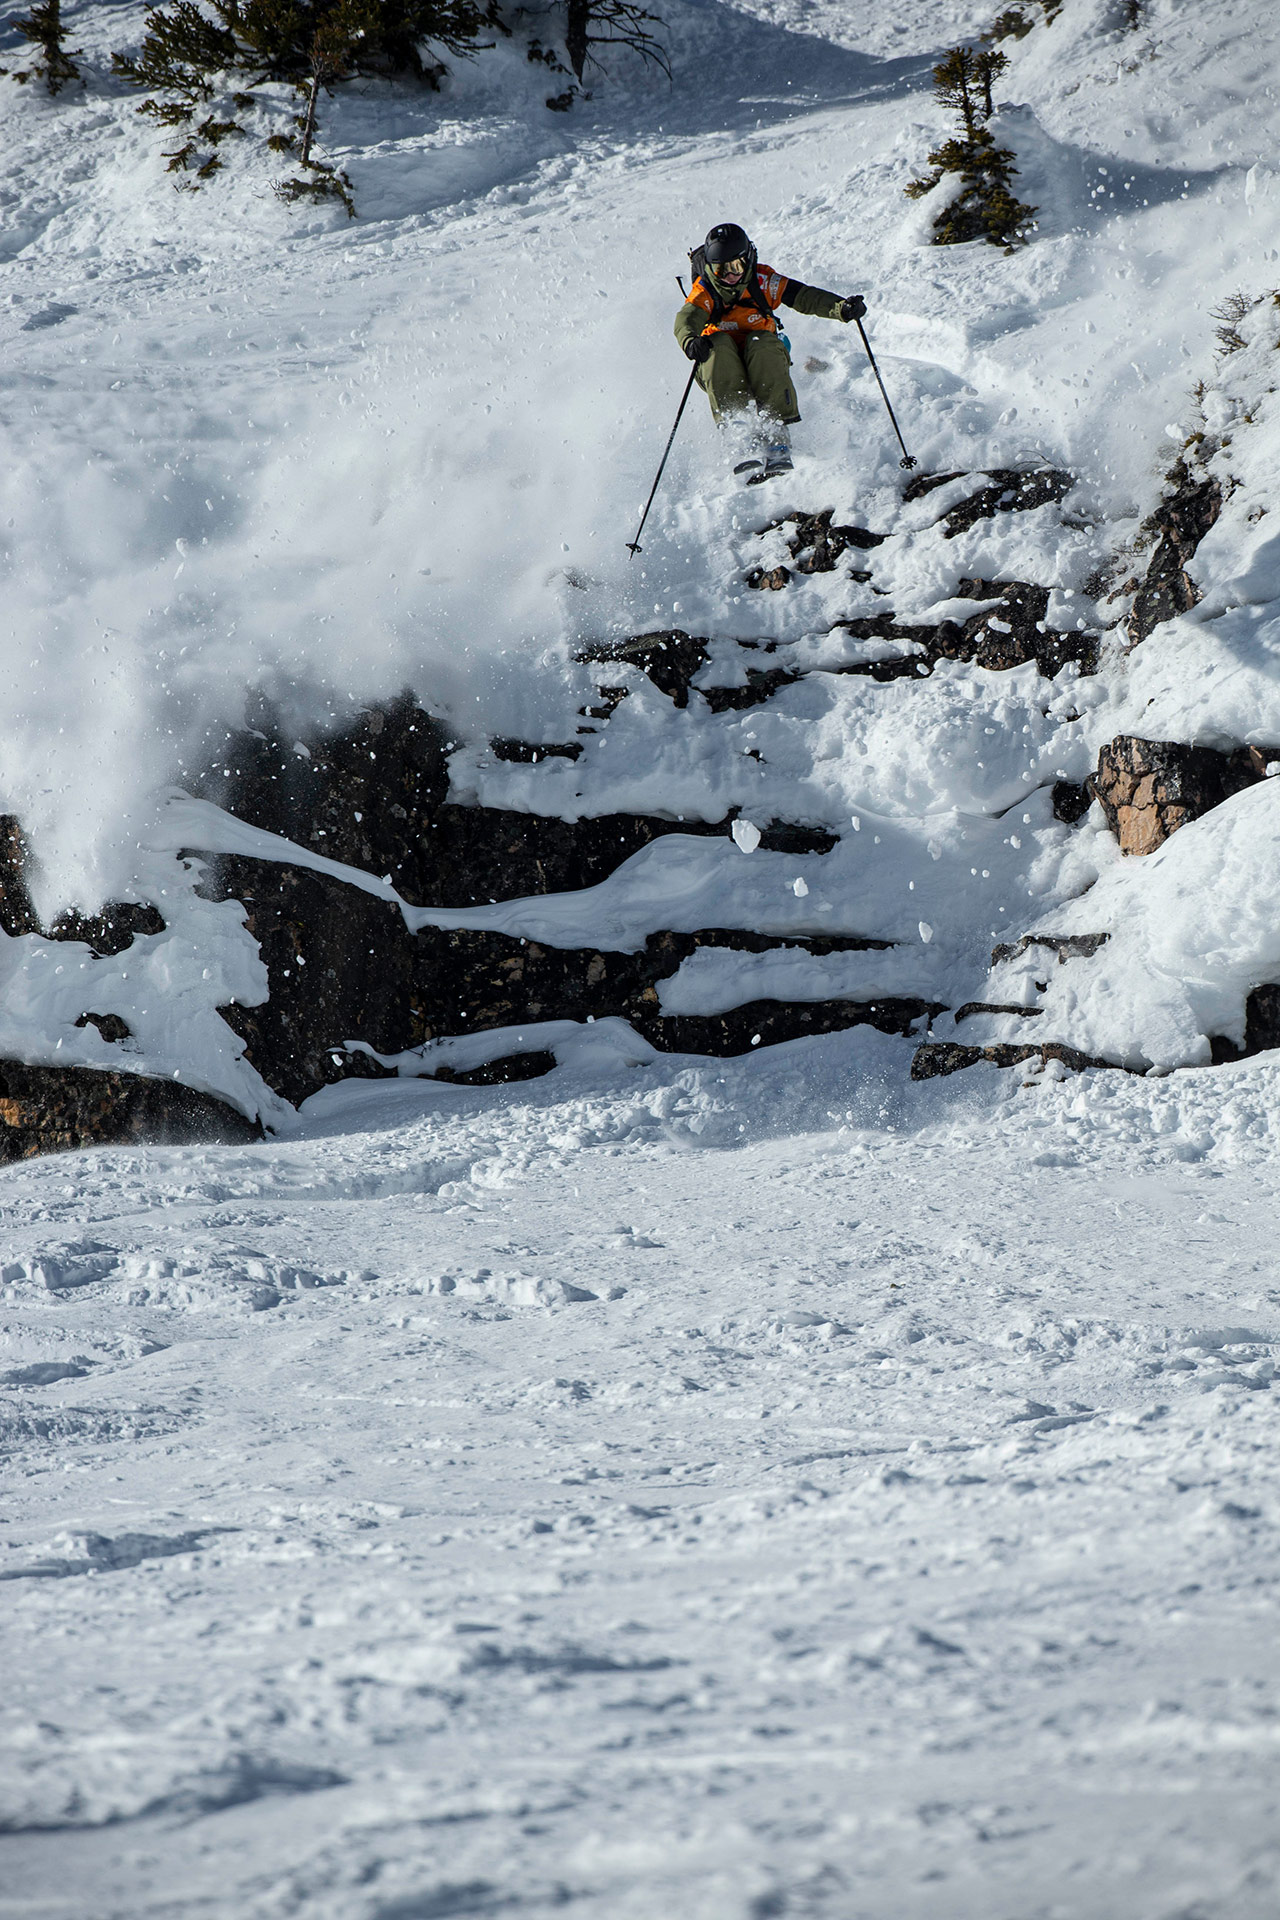 Jess Hotter competes on the 2022 Freeride World Tour in Kicking Horse, Canada